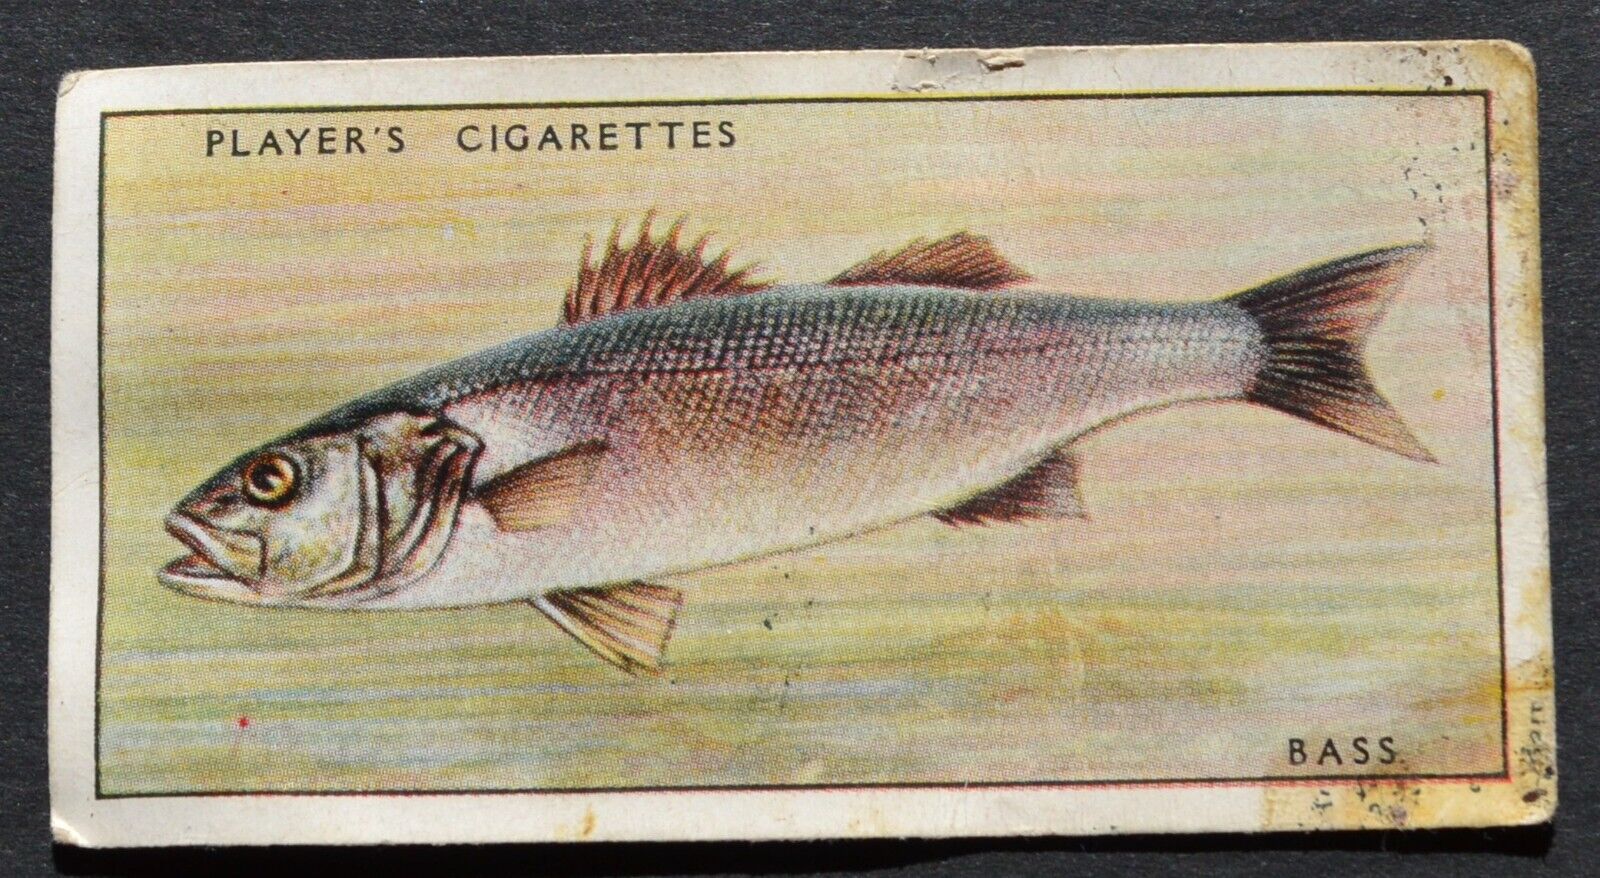 1935 John Players Cigarette Card Fresh-Water Fishes No. 2 Bass or Sea-Perch